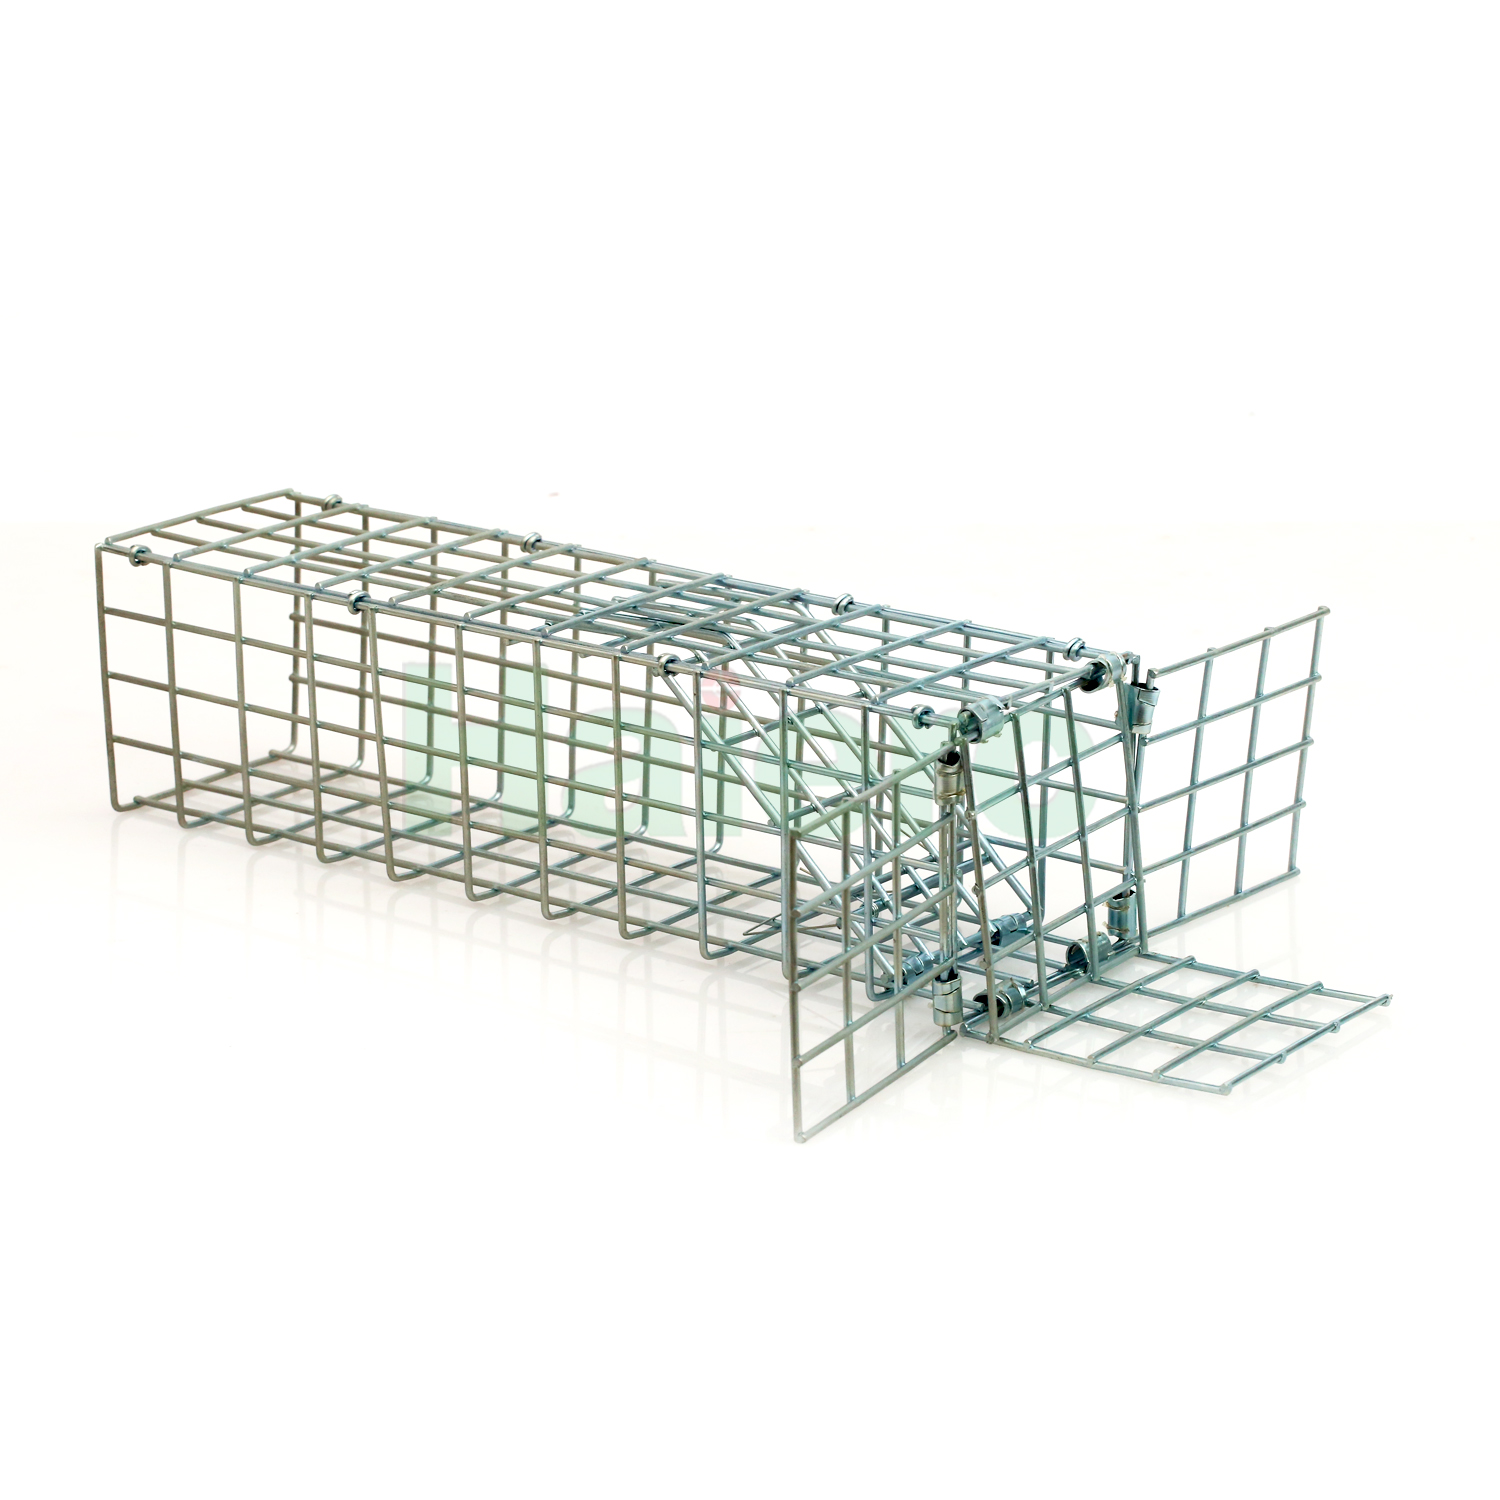 >Haierc Pest Control One Way Doors Cage Metal Squirrels Trap Rodent Control Mouse Trap Cage